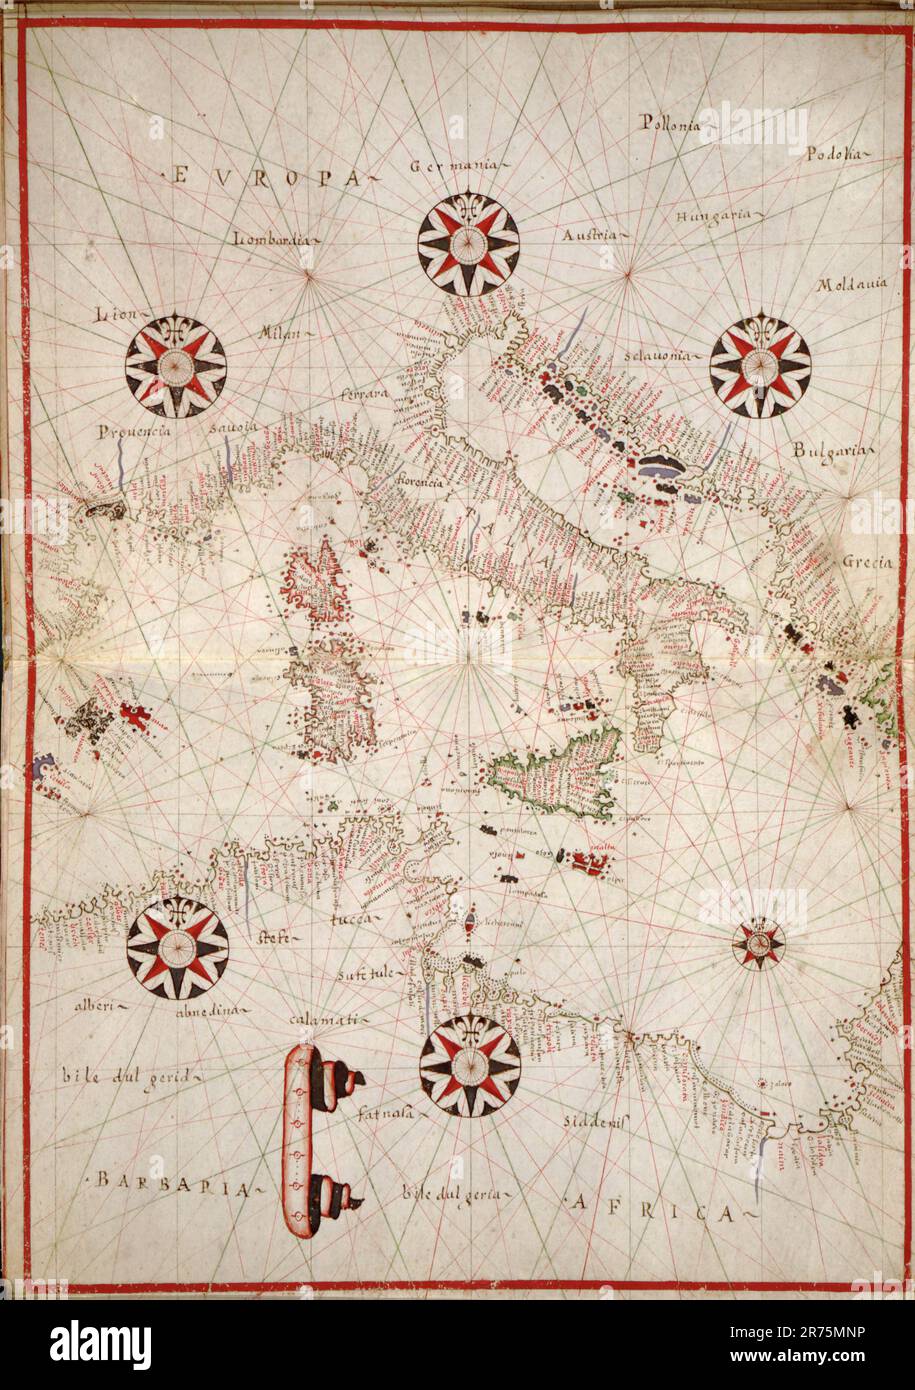 Portolan atlas of Central Mediterranean Portolan atlas of  Western Europe and the British Isles   1590  Pen-and-ink and watercolor on vellum. Stock Photo